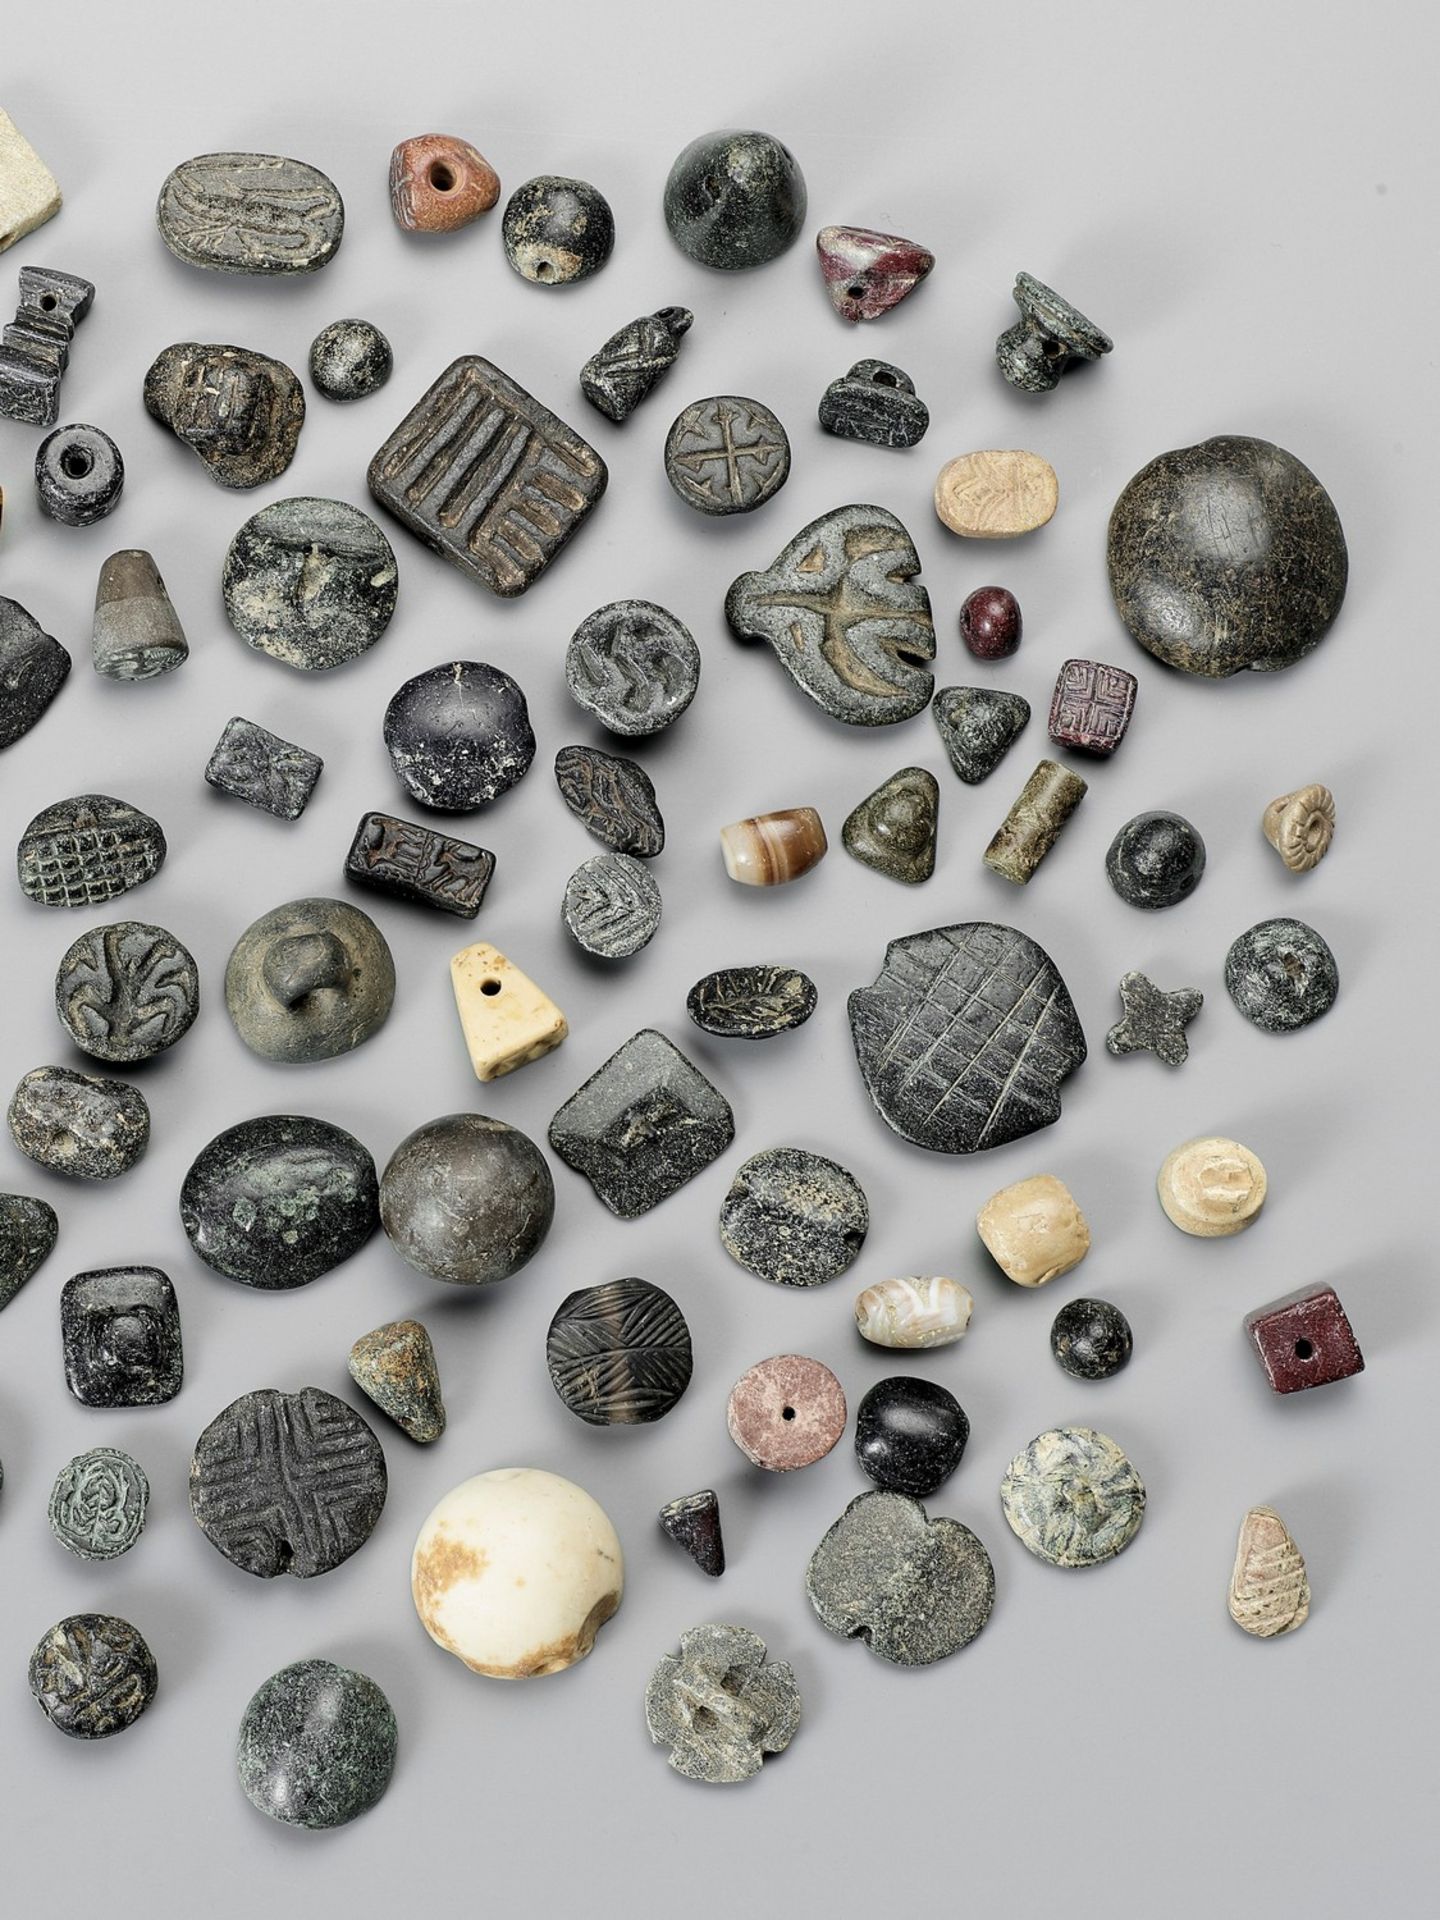 AN AMAZING COLLECTION OF 101!!! NEAR EAST ANCIENT SEALS AND BEADS - Bild 3 aus 4